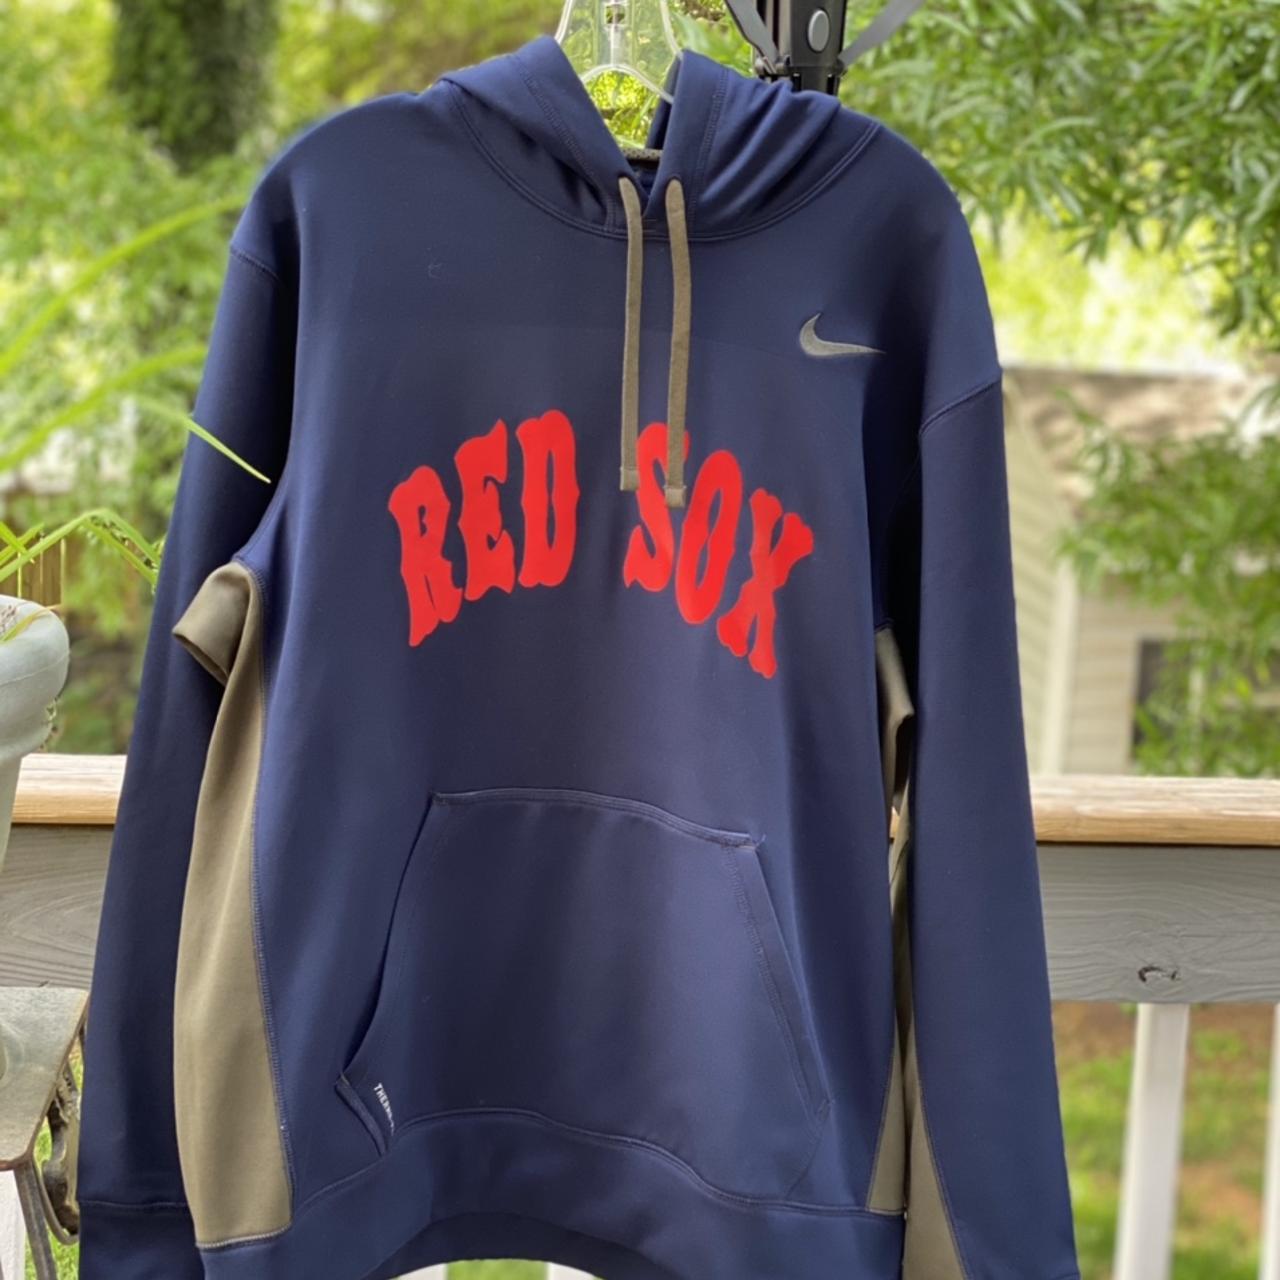 Nike Red Sox Therma Fit Hooded , Barely worn